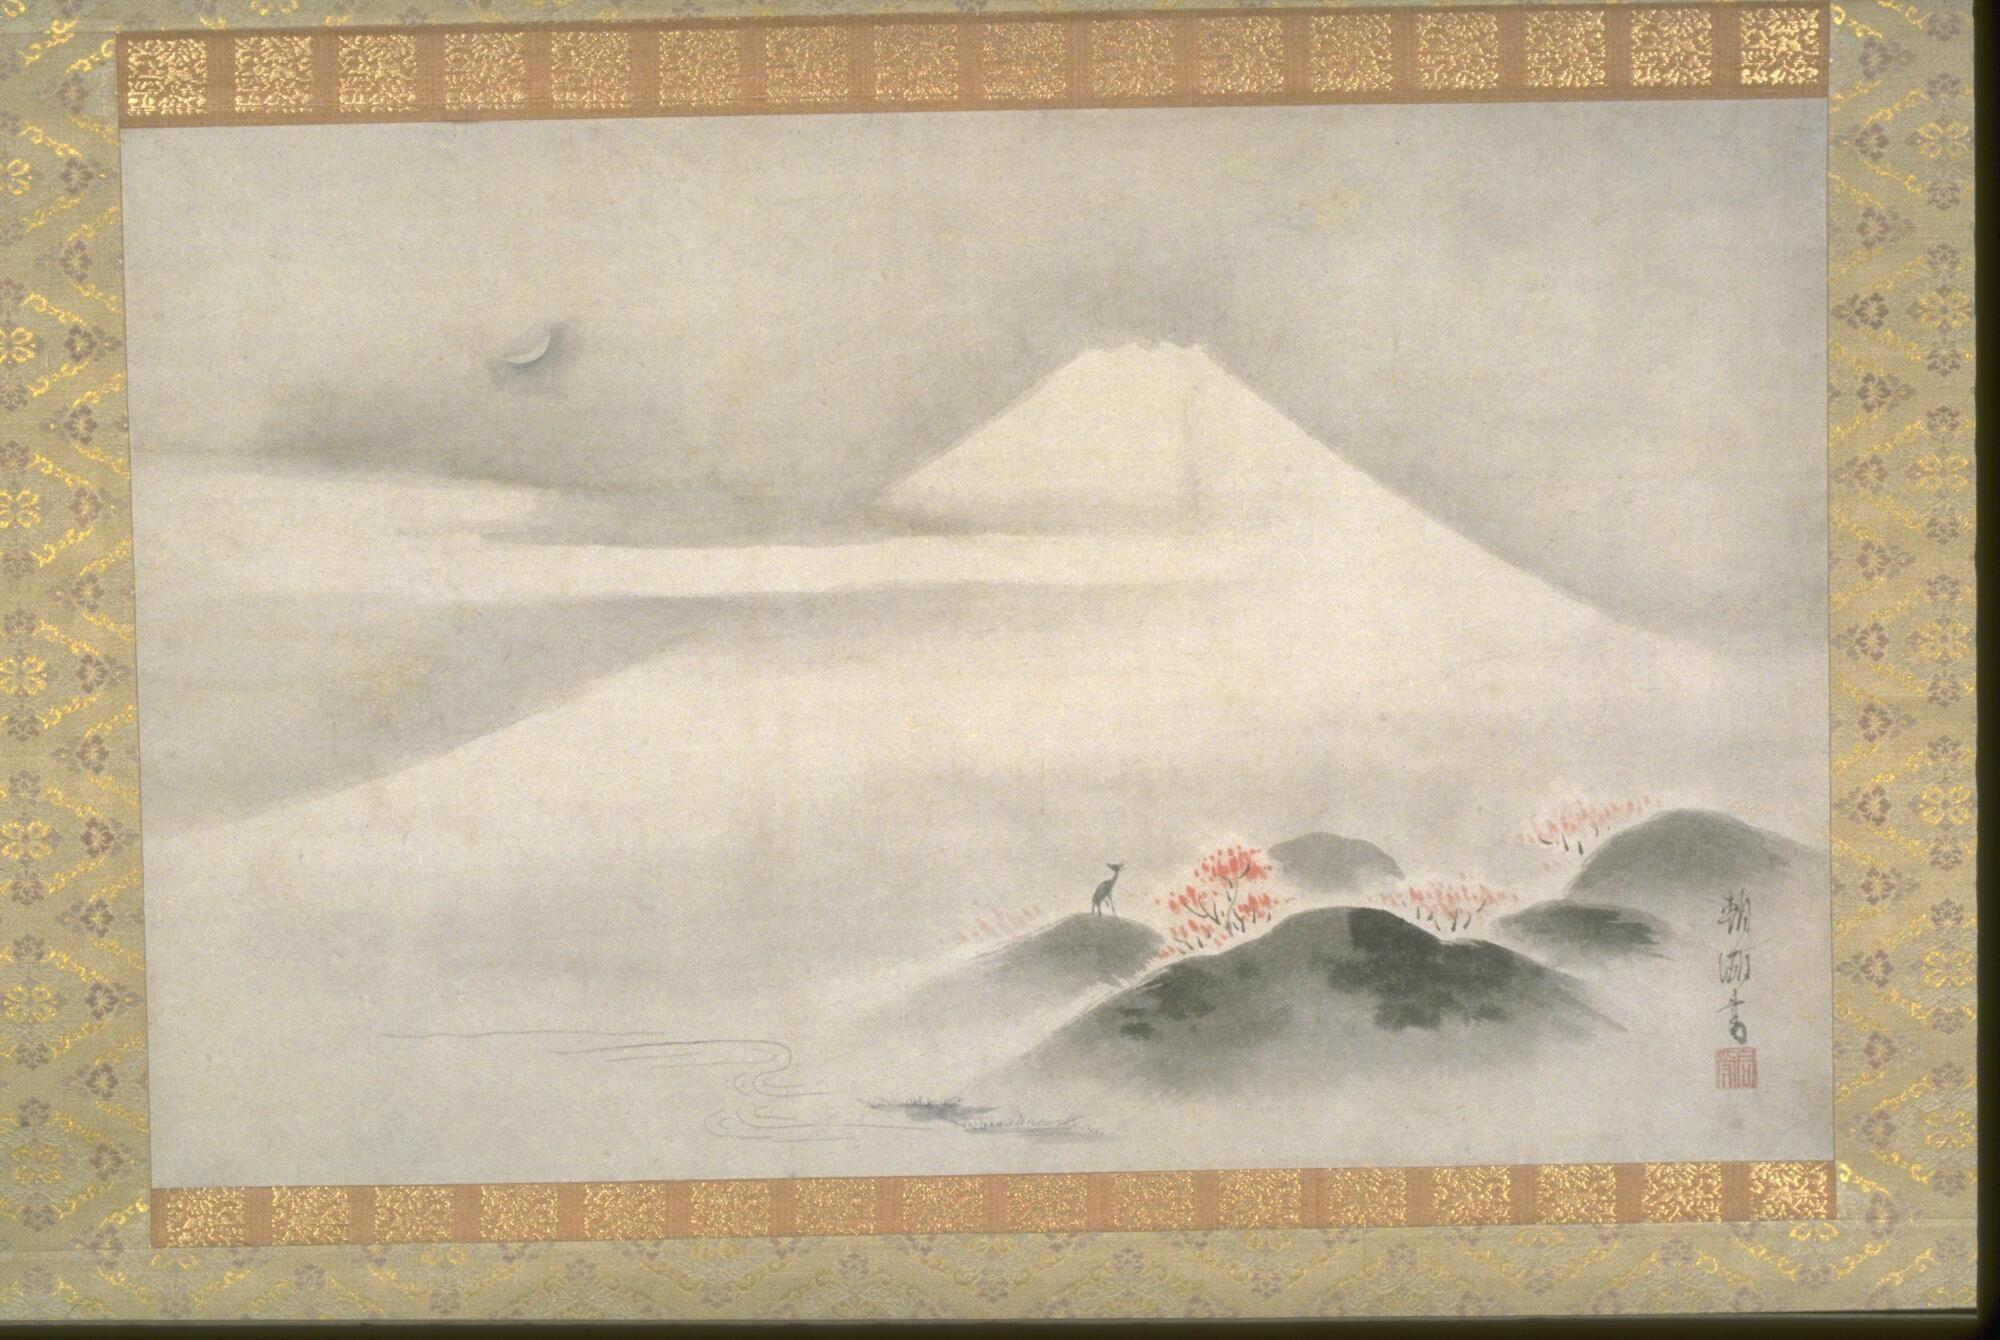 In the center of this painting, there is Mt. Fuji. Next to the peak of the mountain, to the left of the painting, there is a crescent moon and clouds. To the bottom right of the painting, there are green hills with trees that have red fall leaves on them. Next to these trees, there is one lone deer looking up to the sky. At the bottom of the Mountain, there is a river.